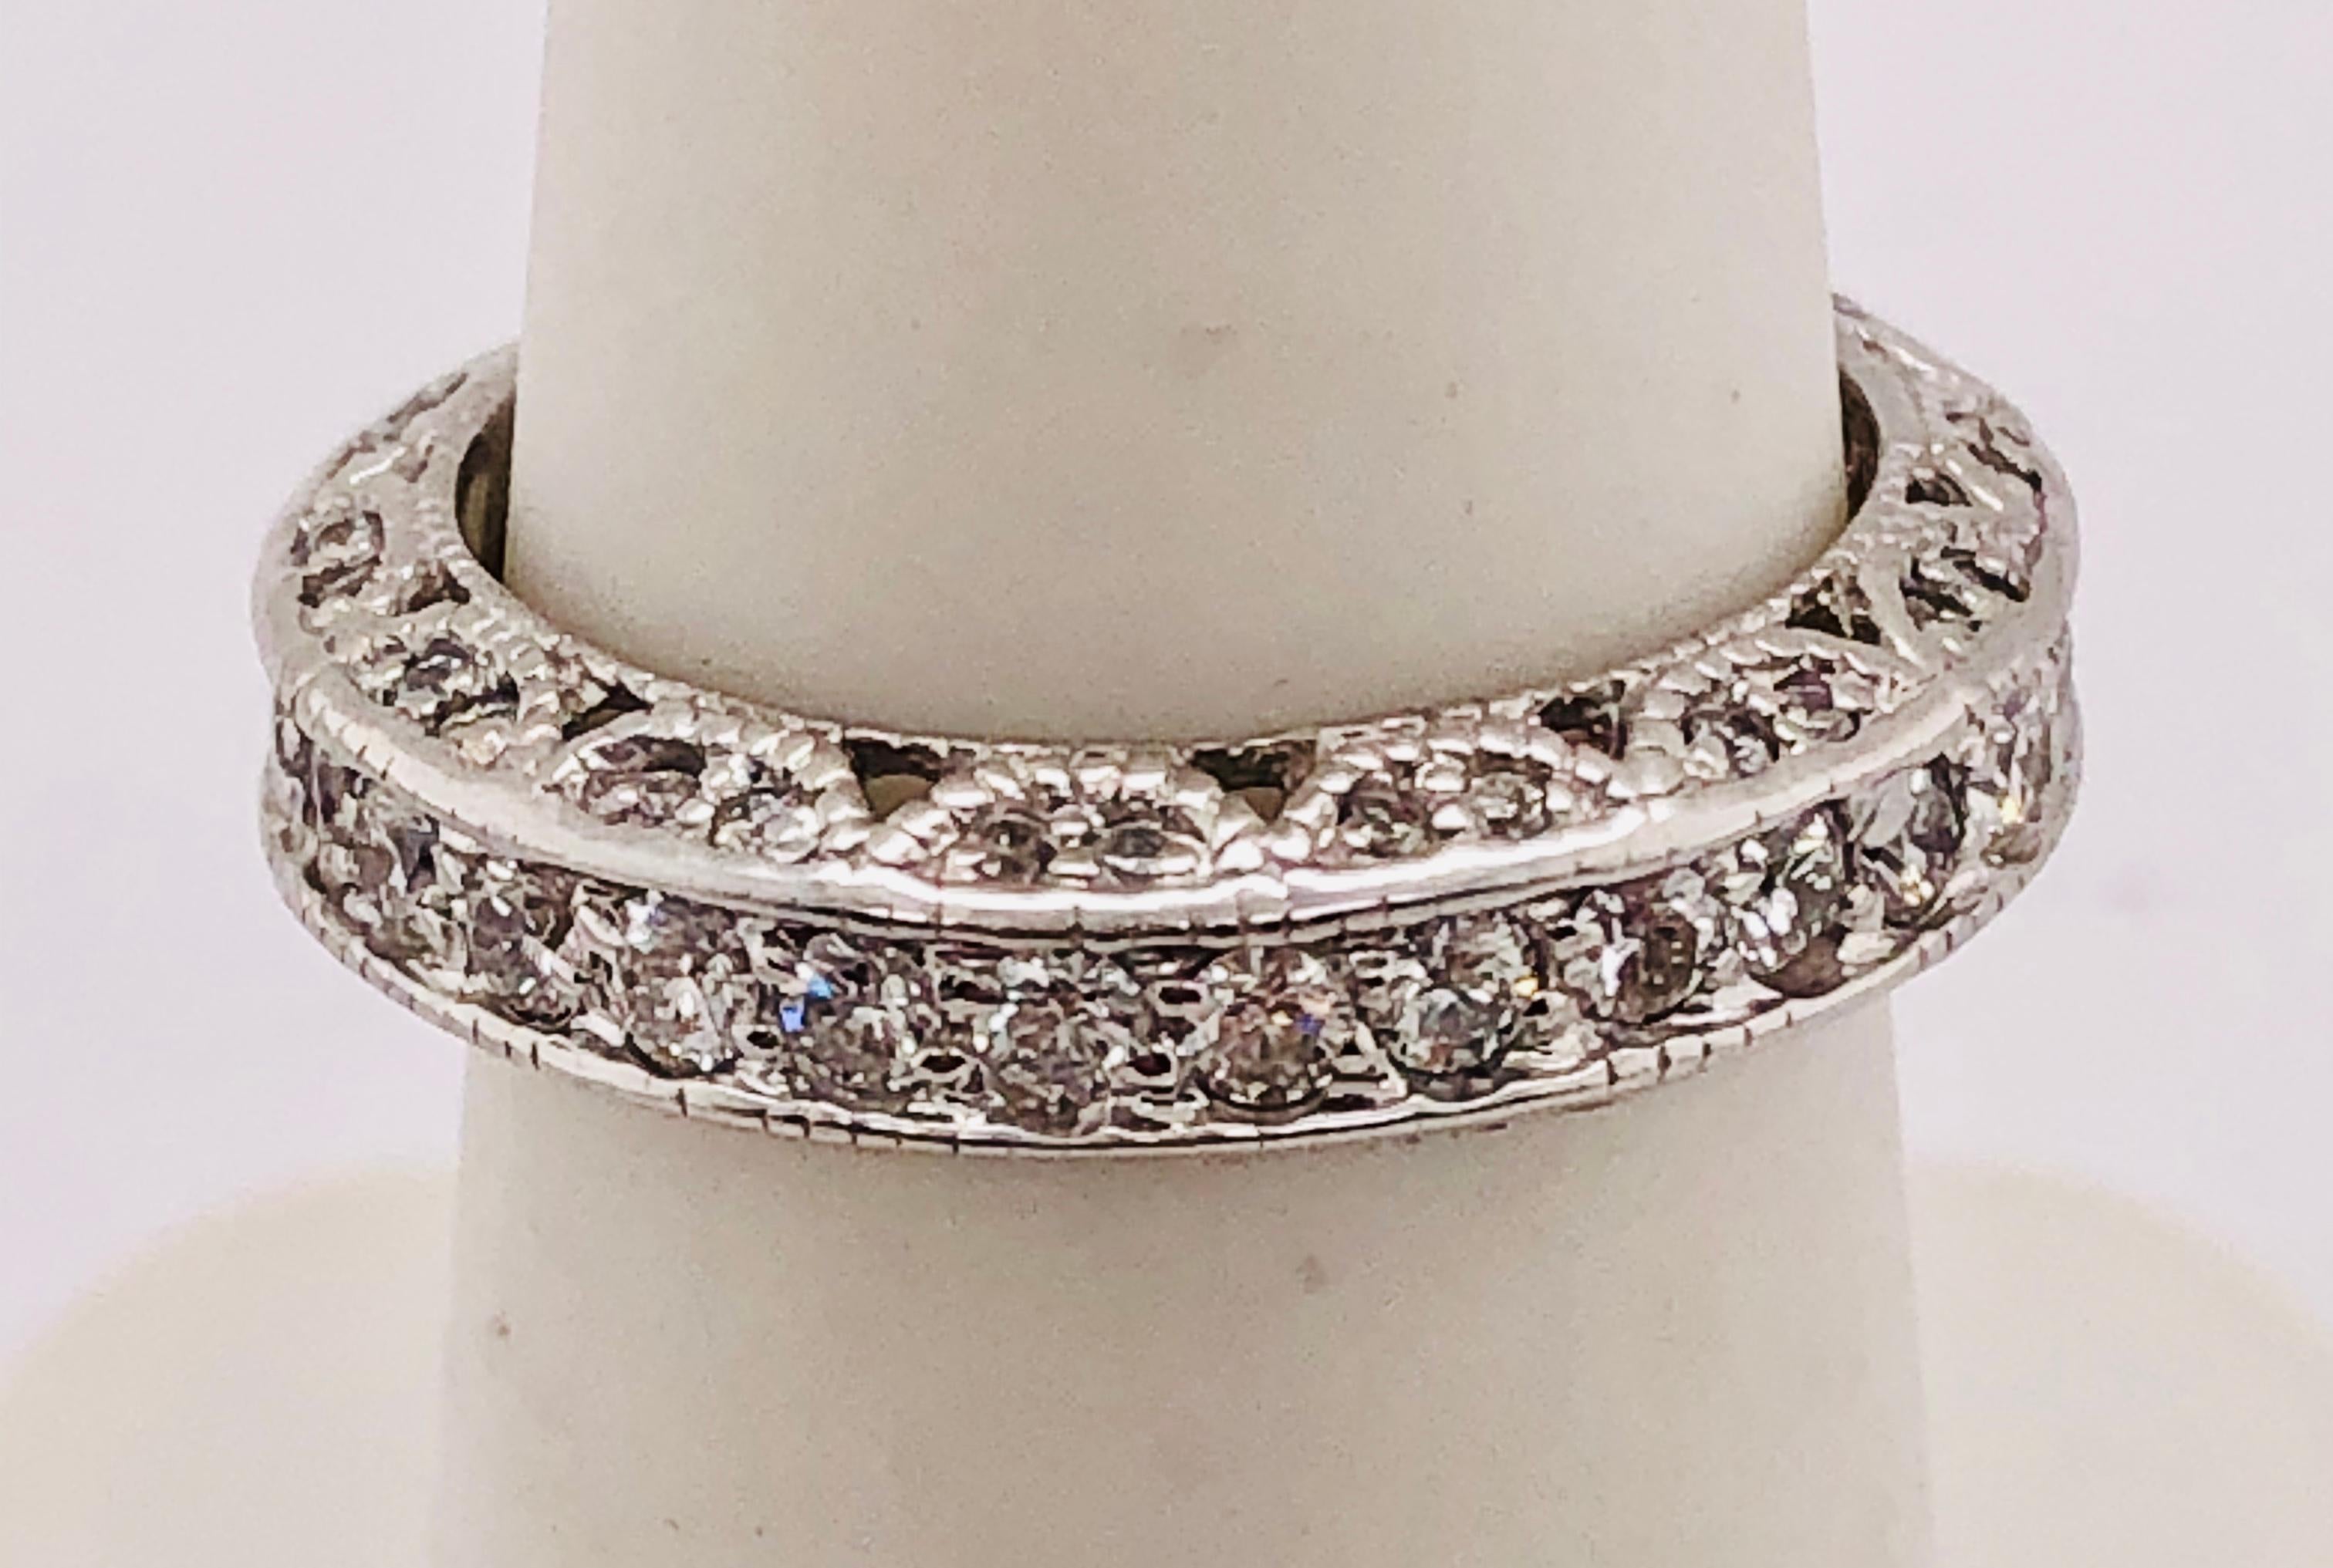 14Kt White Gold Diamond Eternity Anniversary Ring Wedding Band 2.00 Total Diamond Weight.
Size 5 
5.28 grams Total Weight.